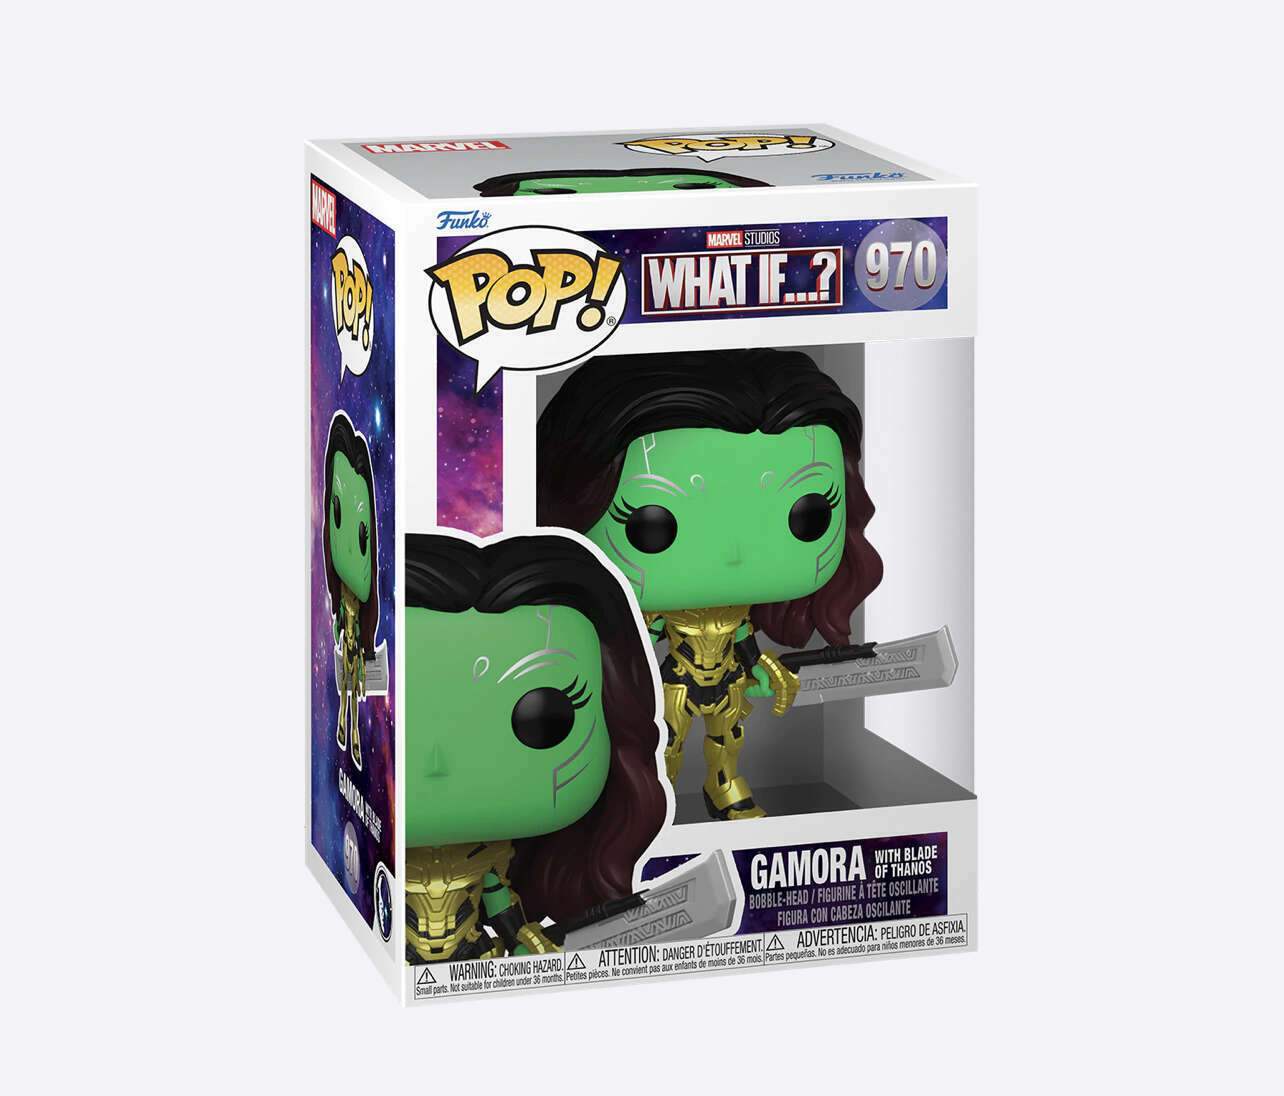 FUNKO POP! WHAT IF - GAMORA WITH BLADE OF THANOS #970 - jeux video game-x